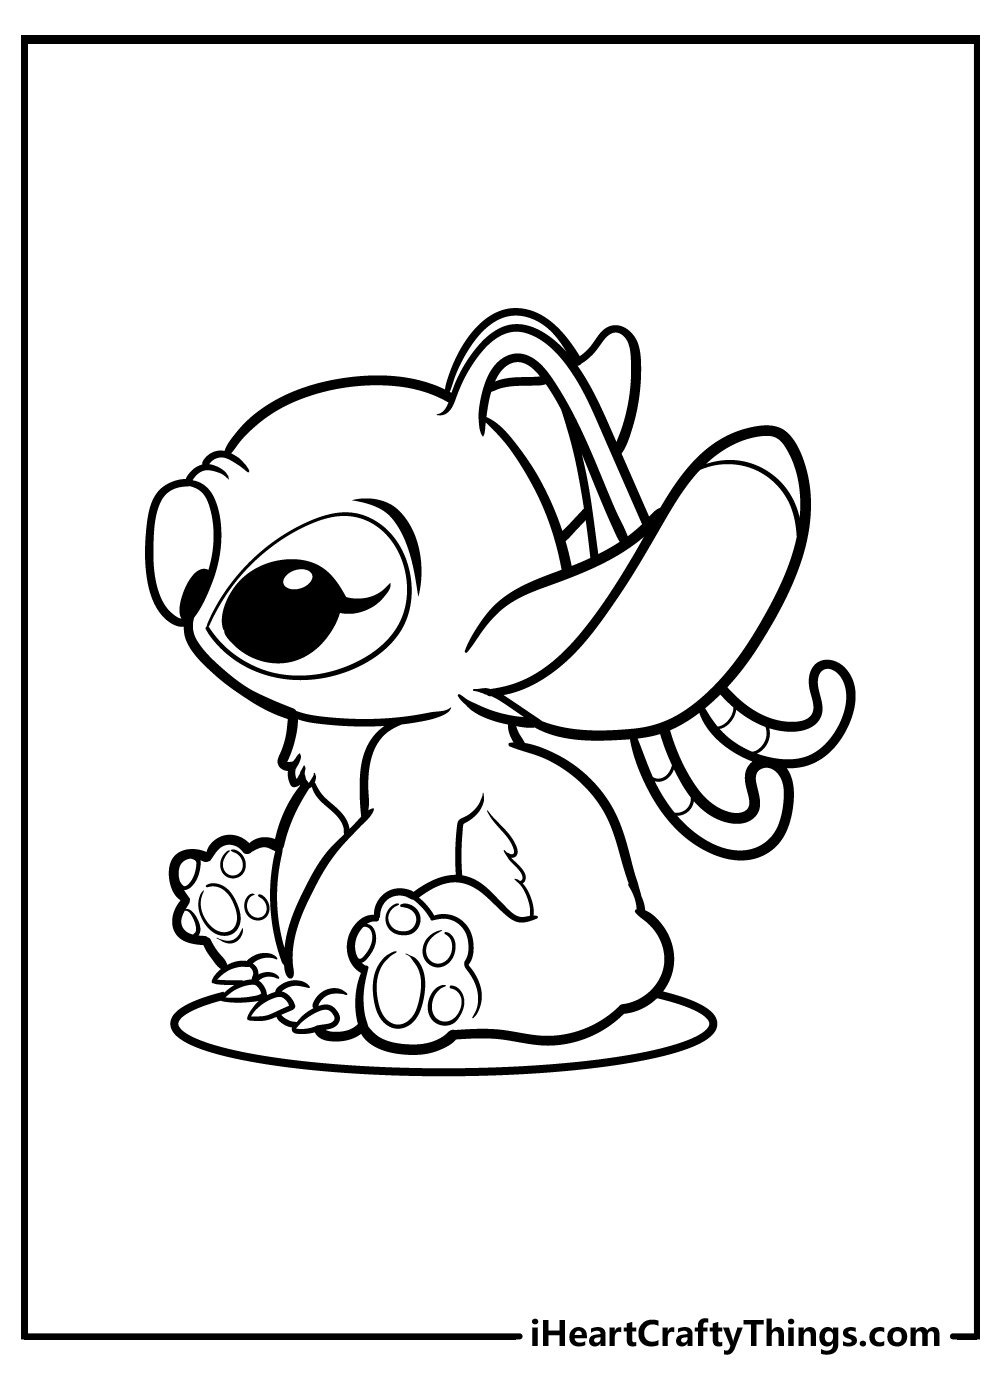 Lilo & Stitch Coloring Pages (Updated 2022)